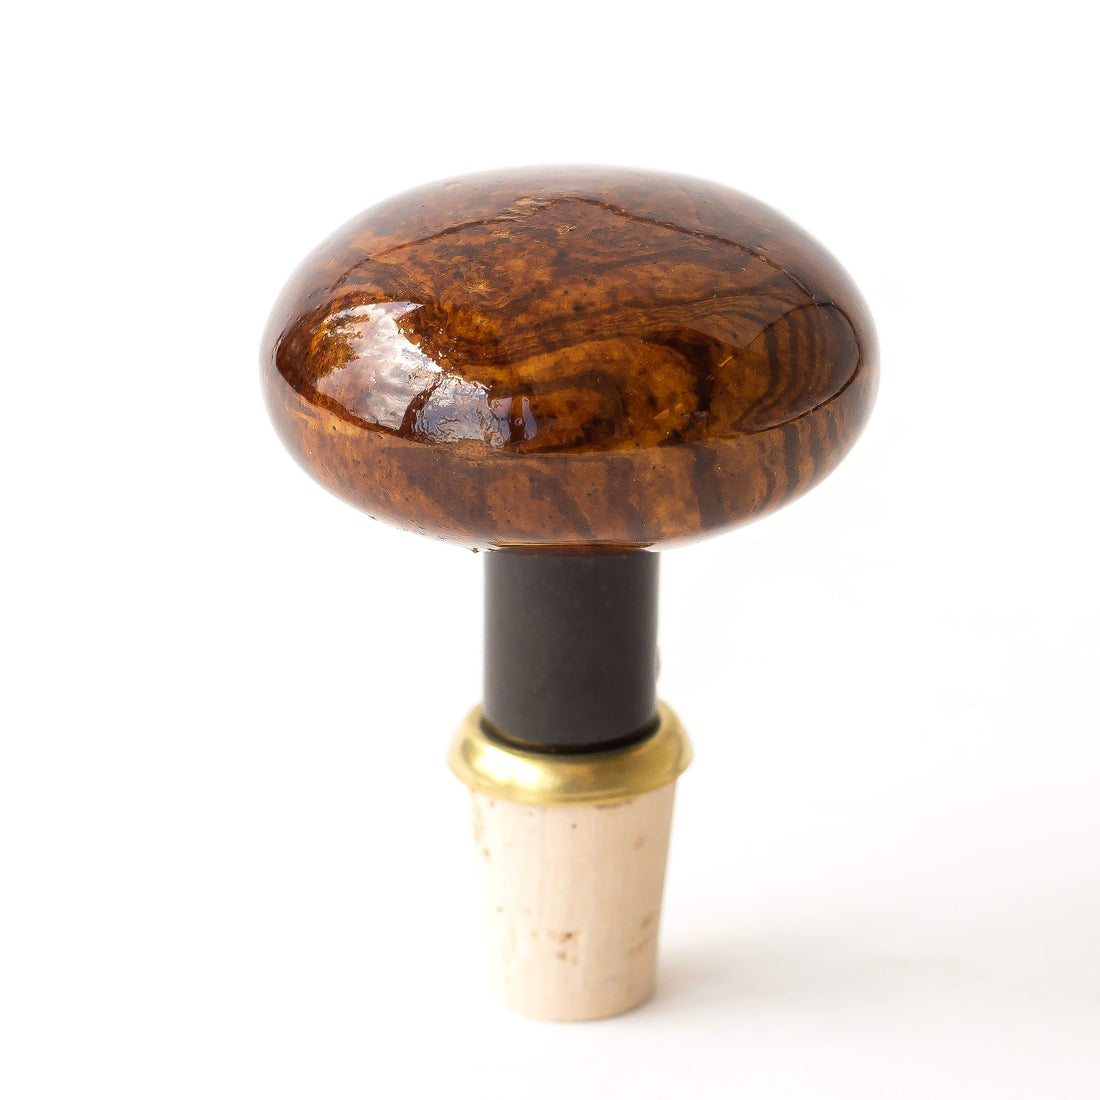 Polished wooden bottle stopper with a cork base featuring a unique Hester &amp; Cook Brown Porcelain Knobstopper against a white background.